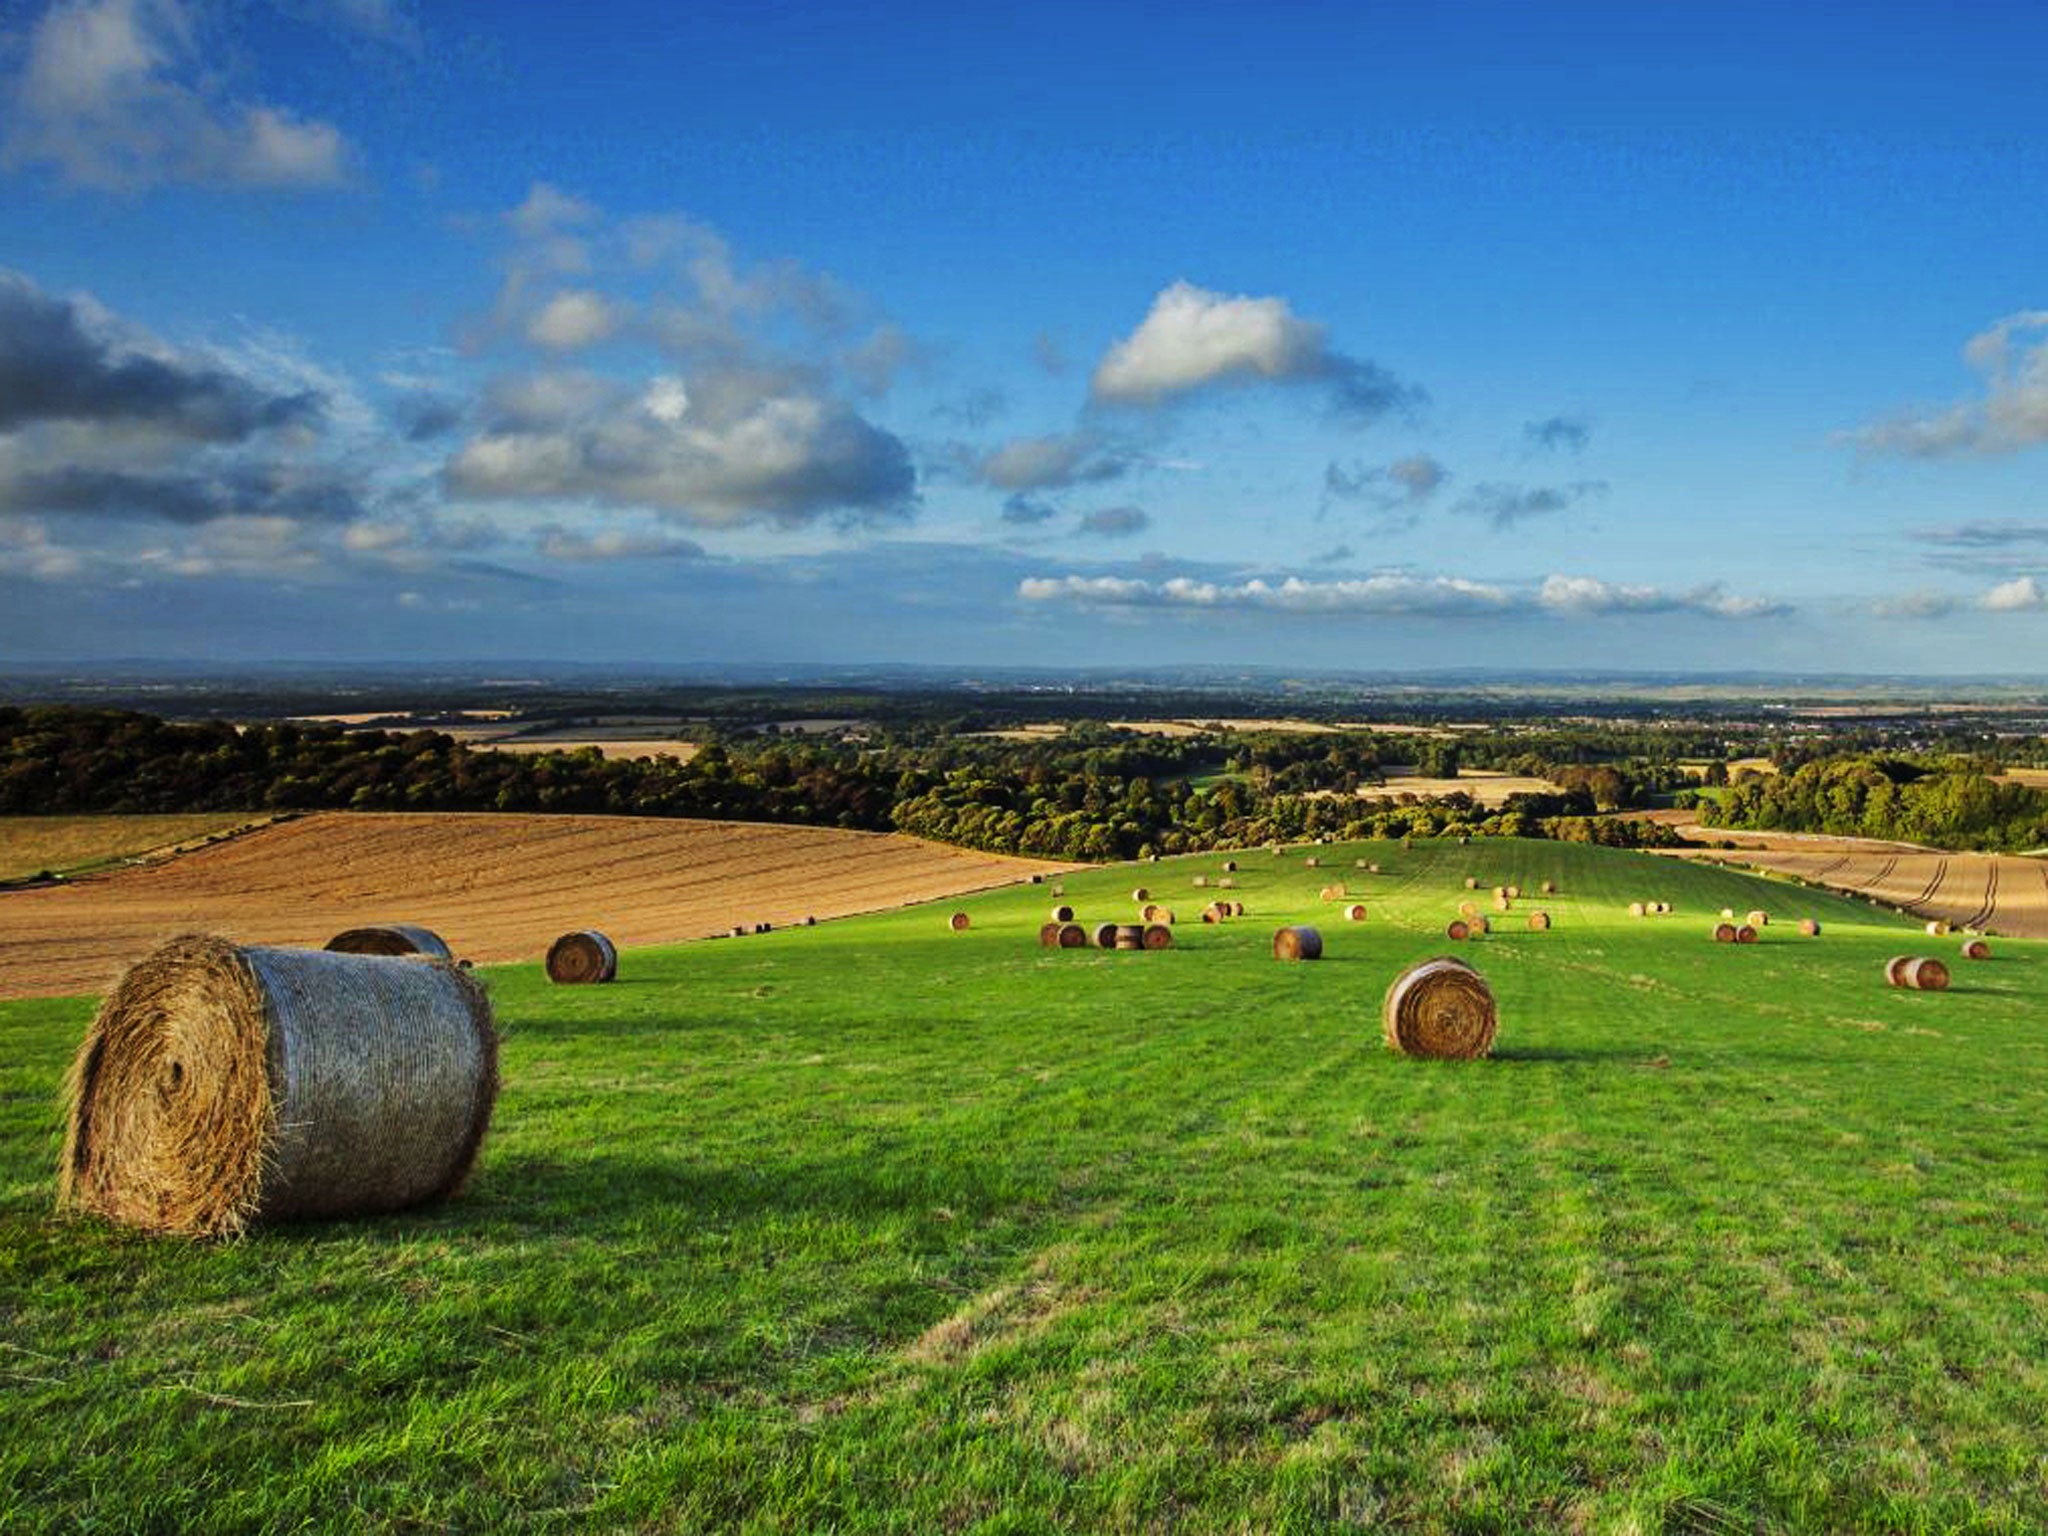 The South Downs National Park